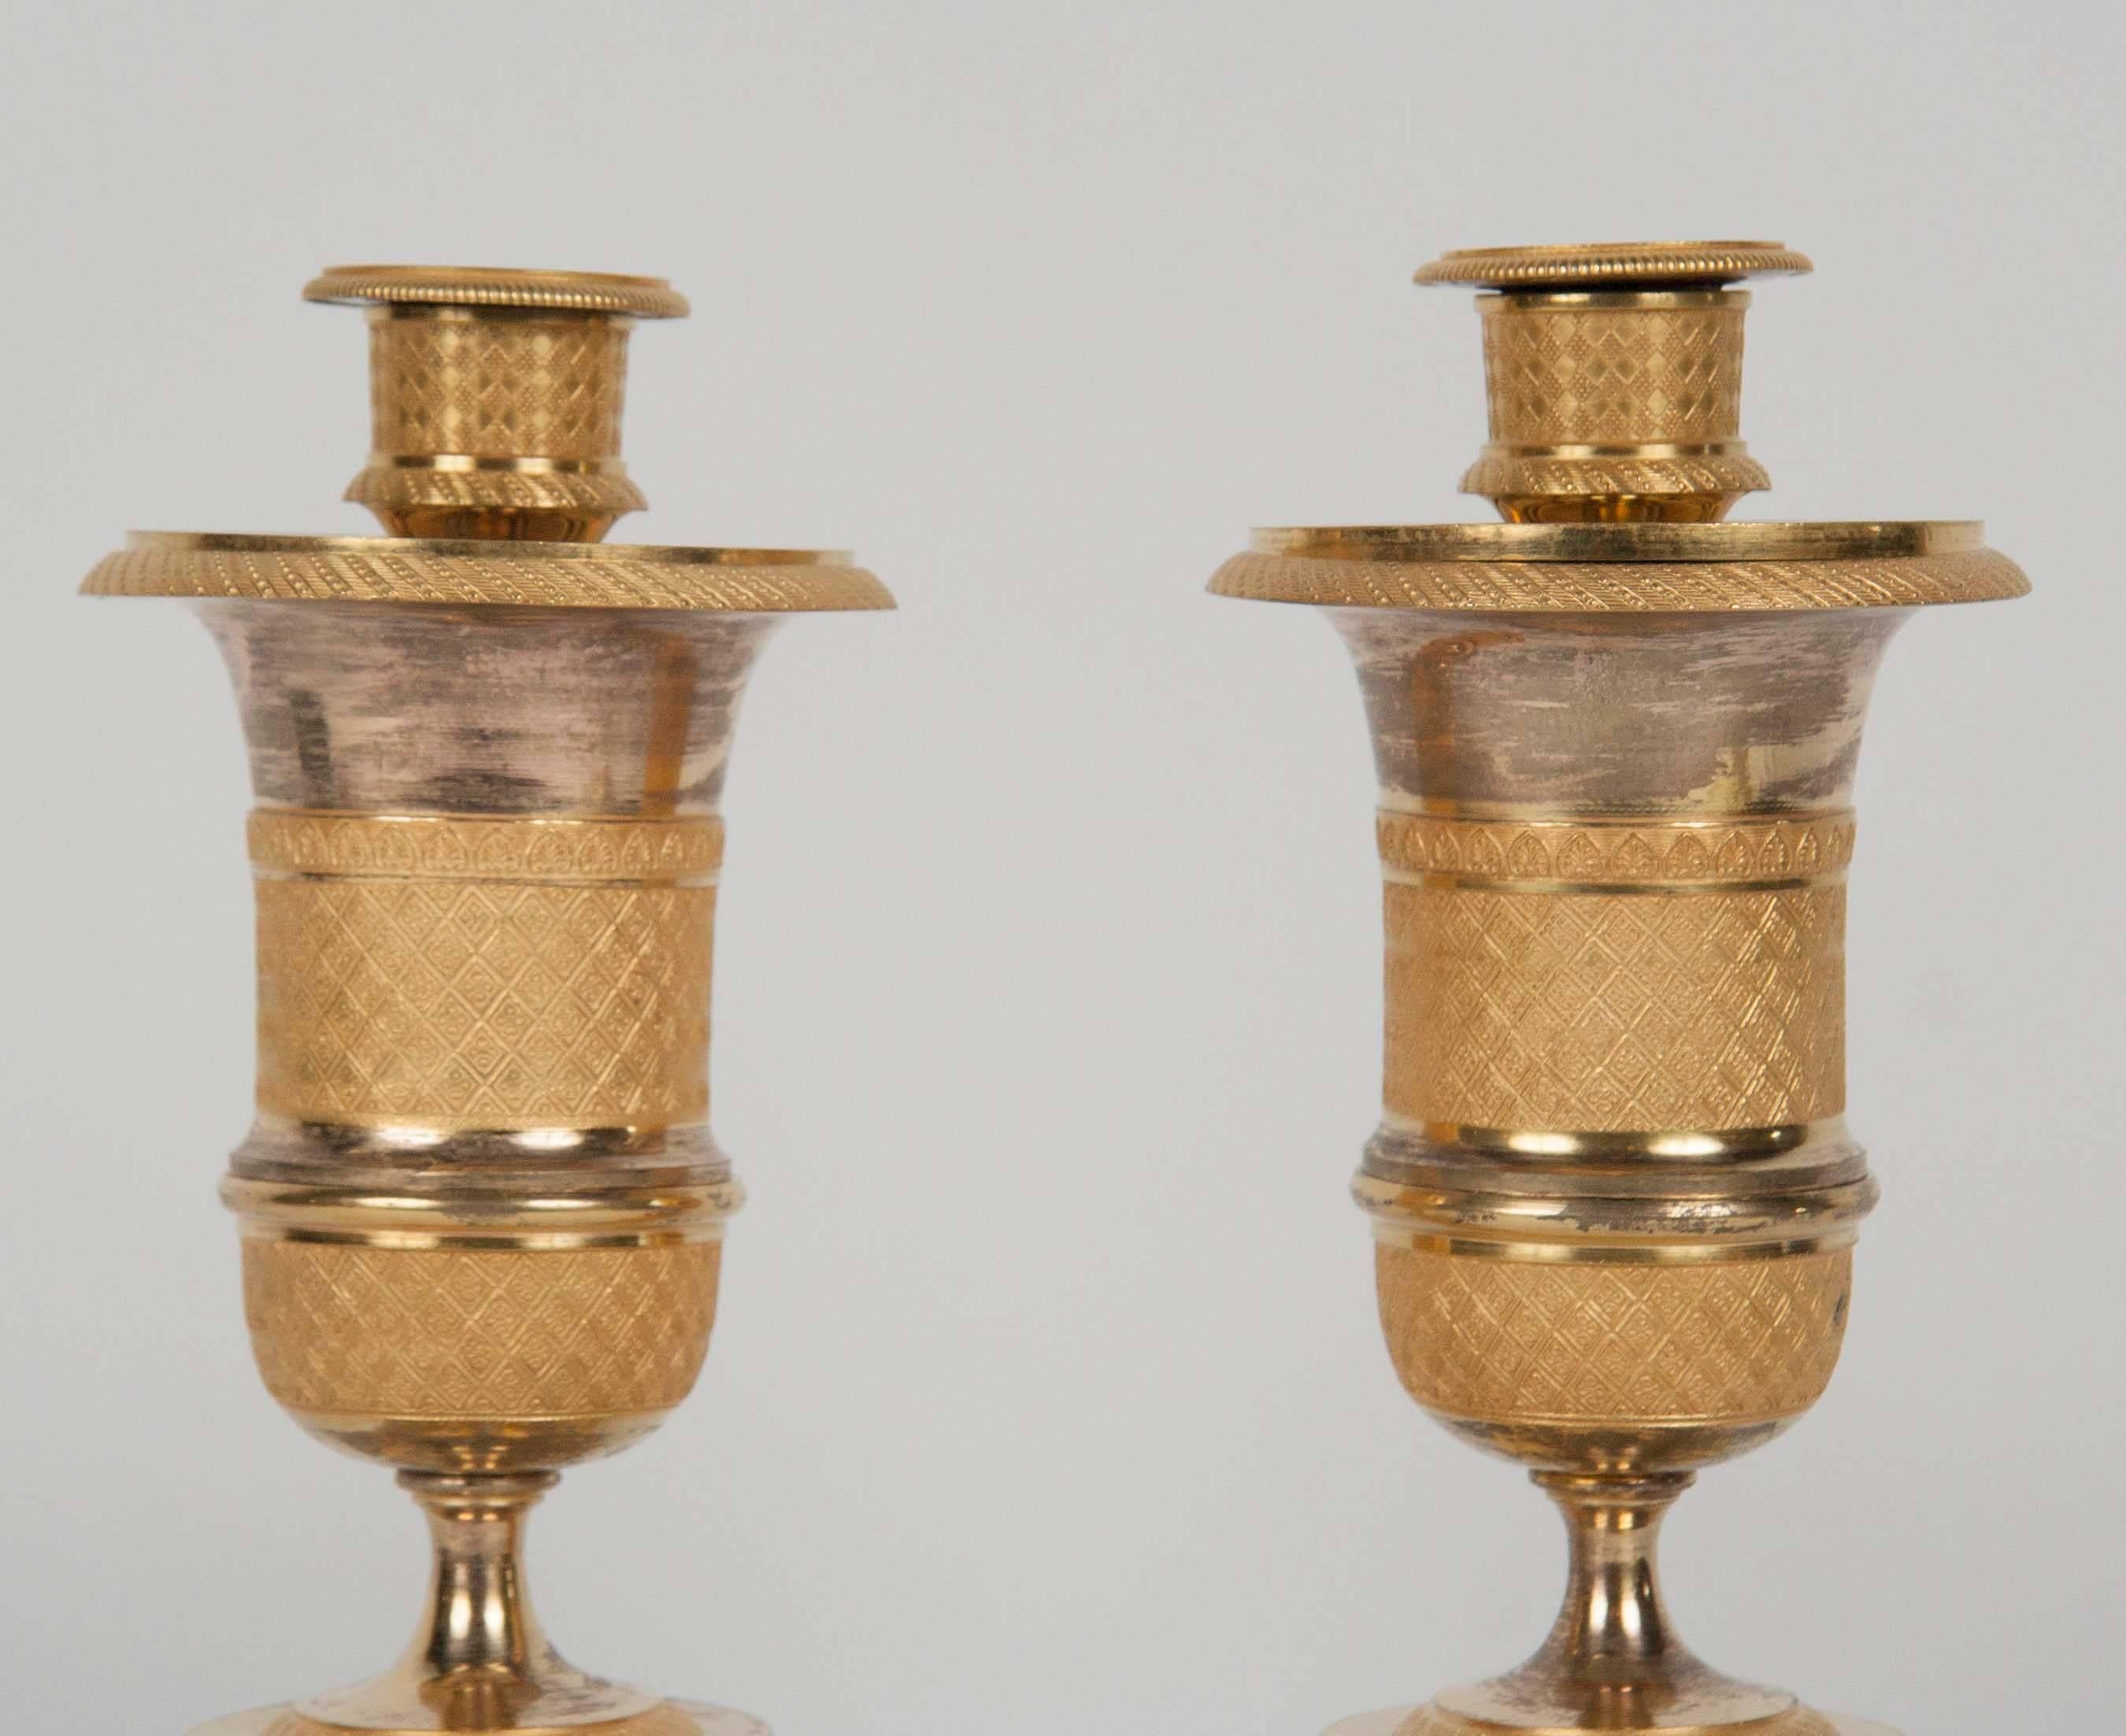 Pair of French Ormolu Bronze Cassolettes or Censers/Candlesticks In Good Condition For Sale In Stamford, CT